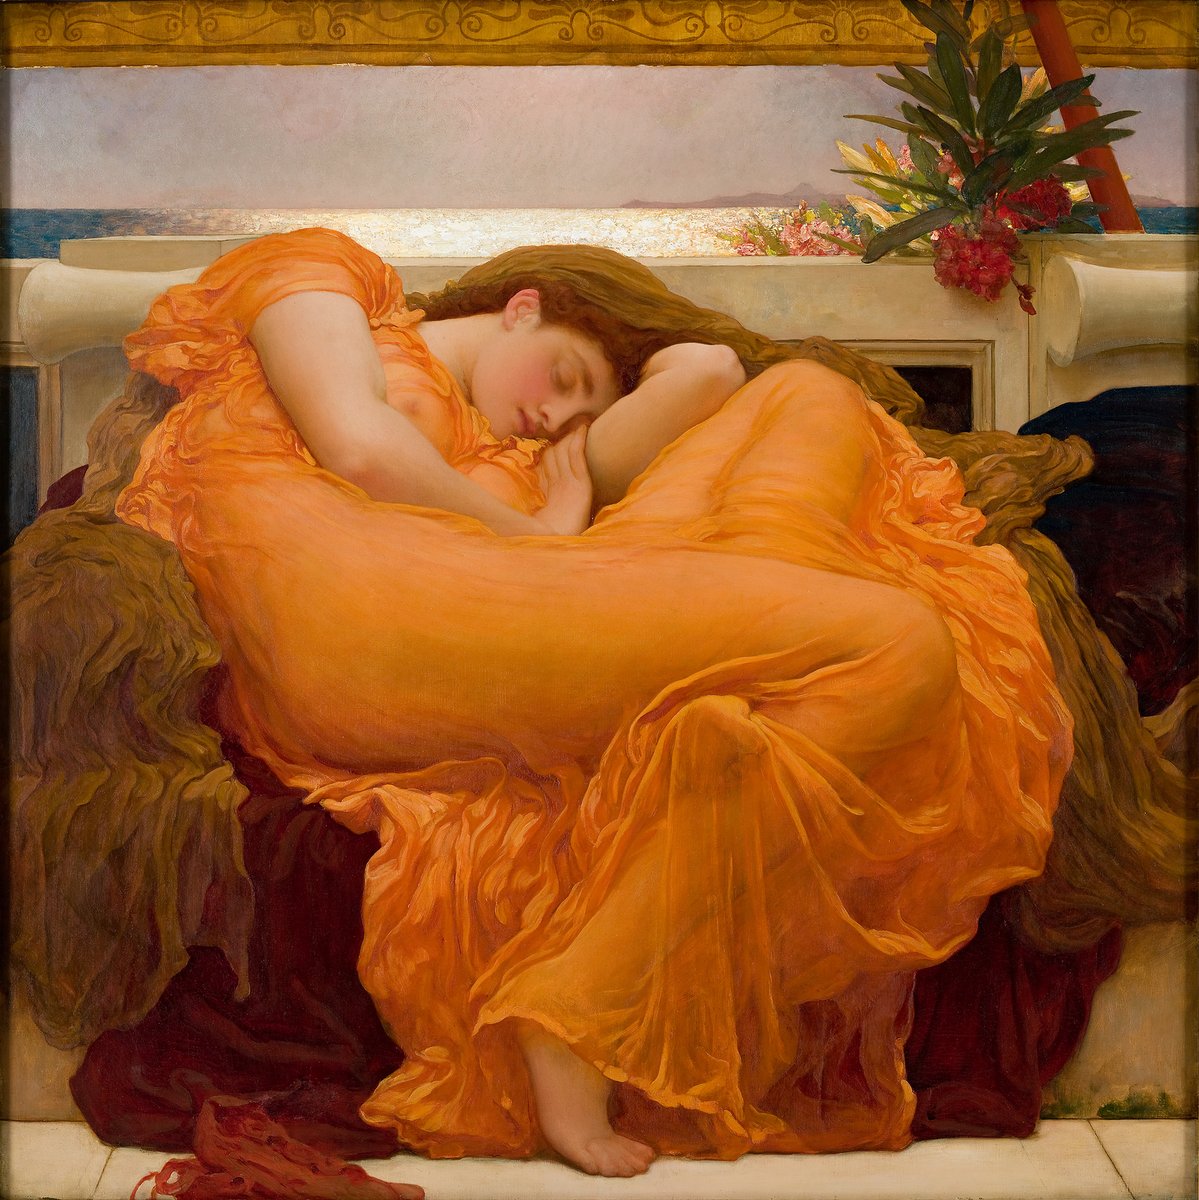 Flaming June is back 🧡 Almost 130 years after it was first exhibited at the RA, Frederic, Lord Leighton PRA’s iconic painting returns in all her orange splendour. See it in our free Collection Gallery from today: roy.ac/t31aq9il Image caption in ALT text.